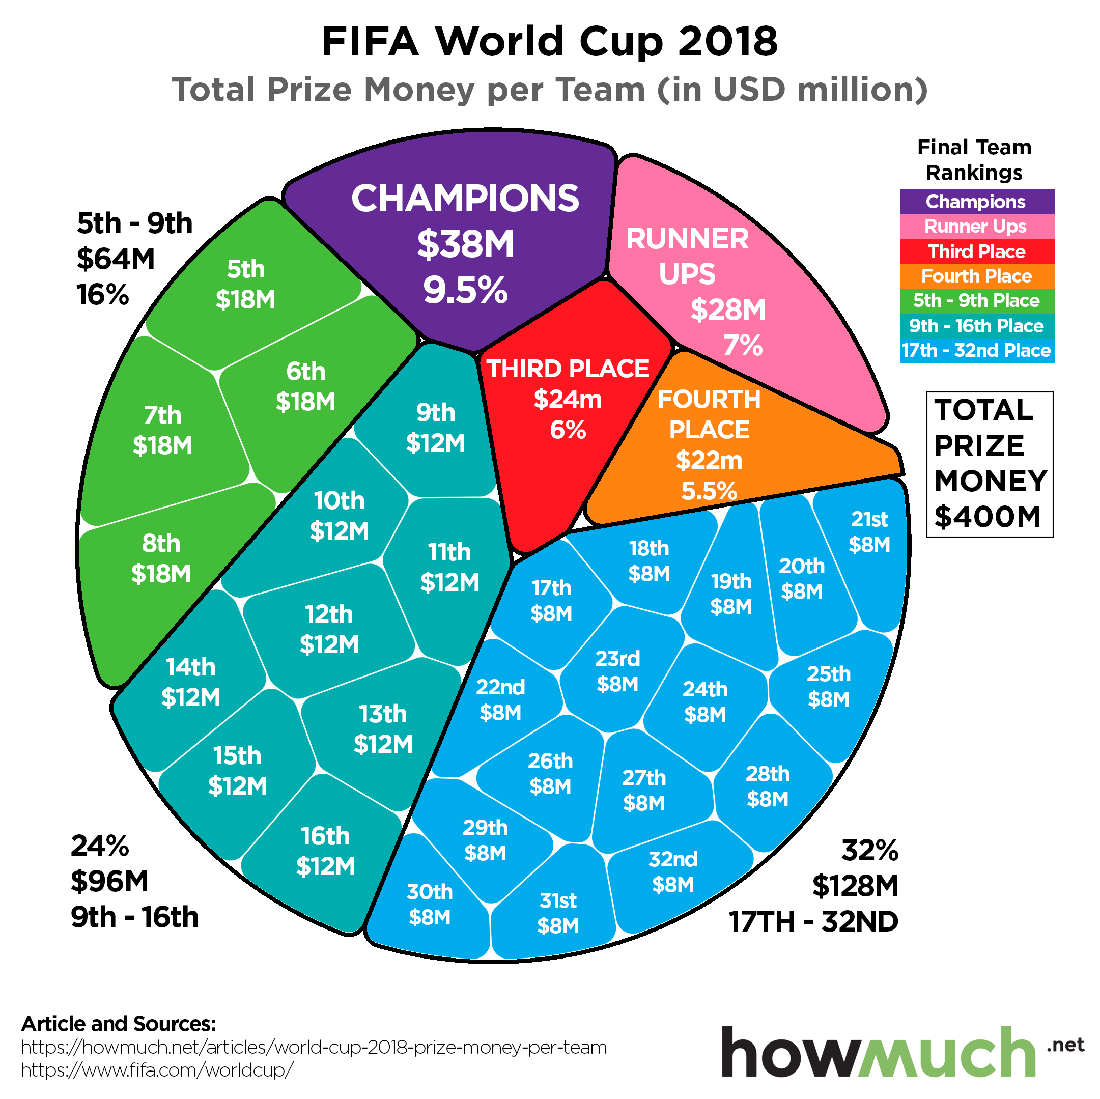 2018 FIFA World Cup Prize Money